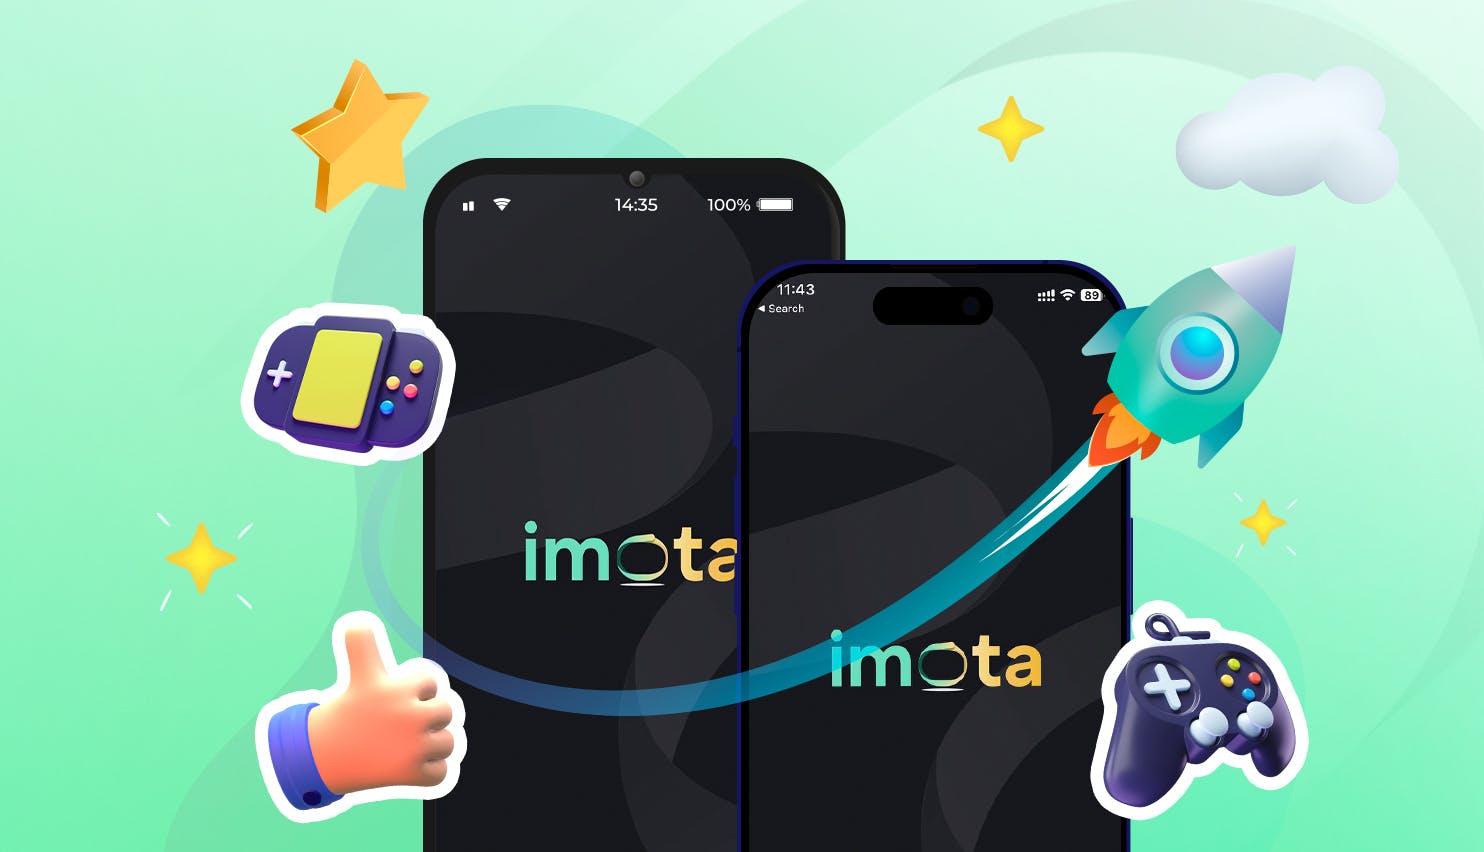 Instructions for logging into Imota with a google account